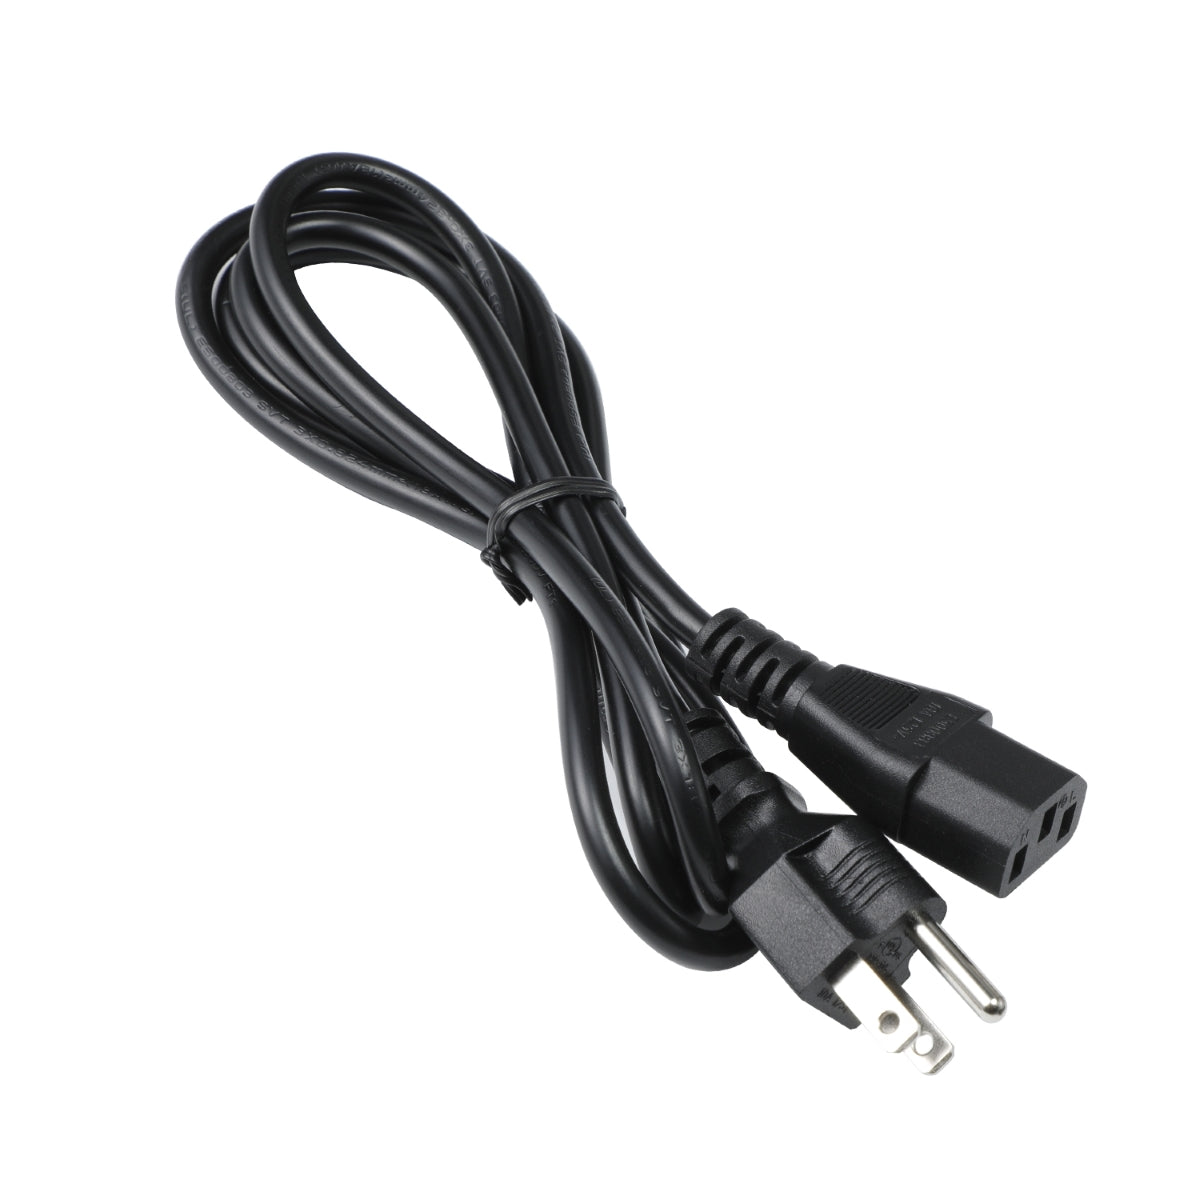 Power Cable for Philips 223V7QJAB Monitor.